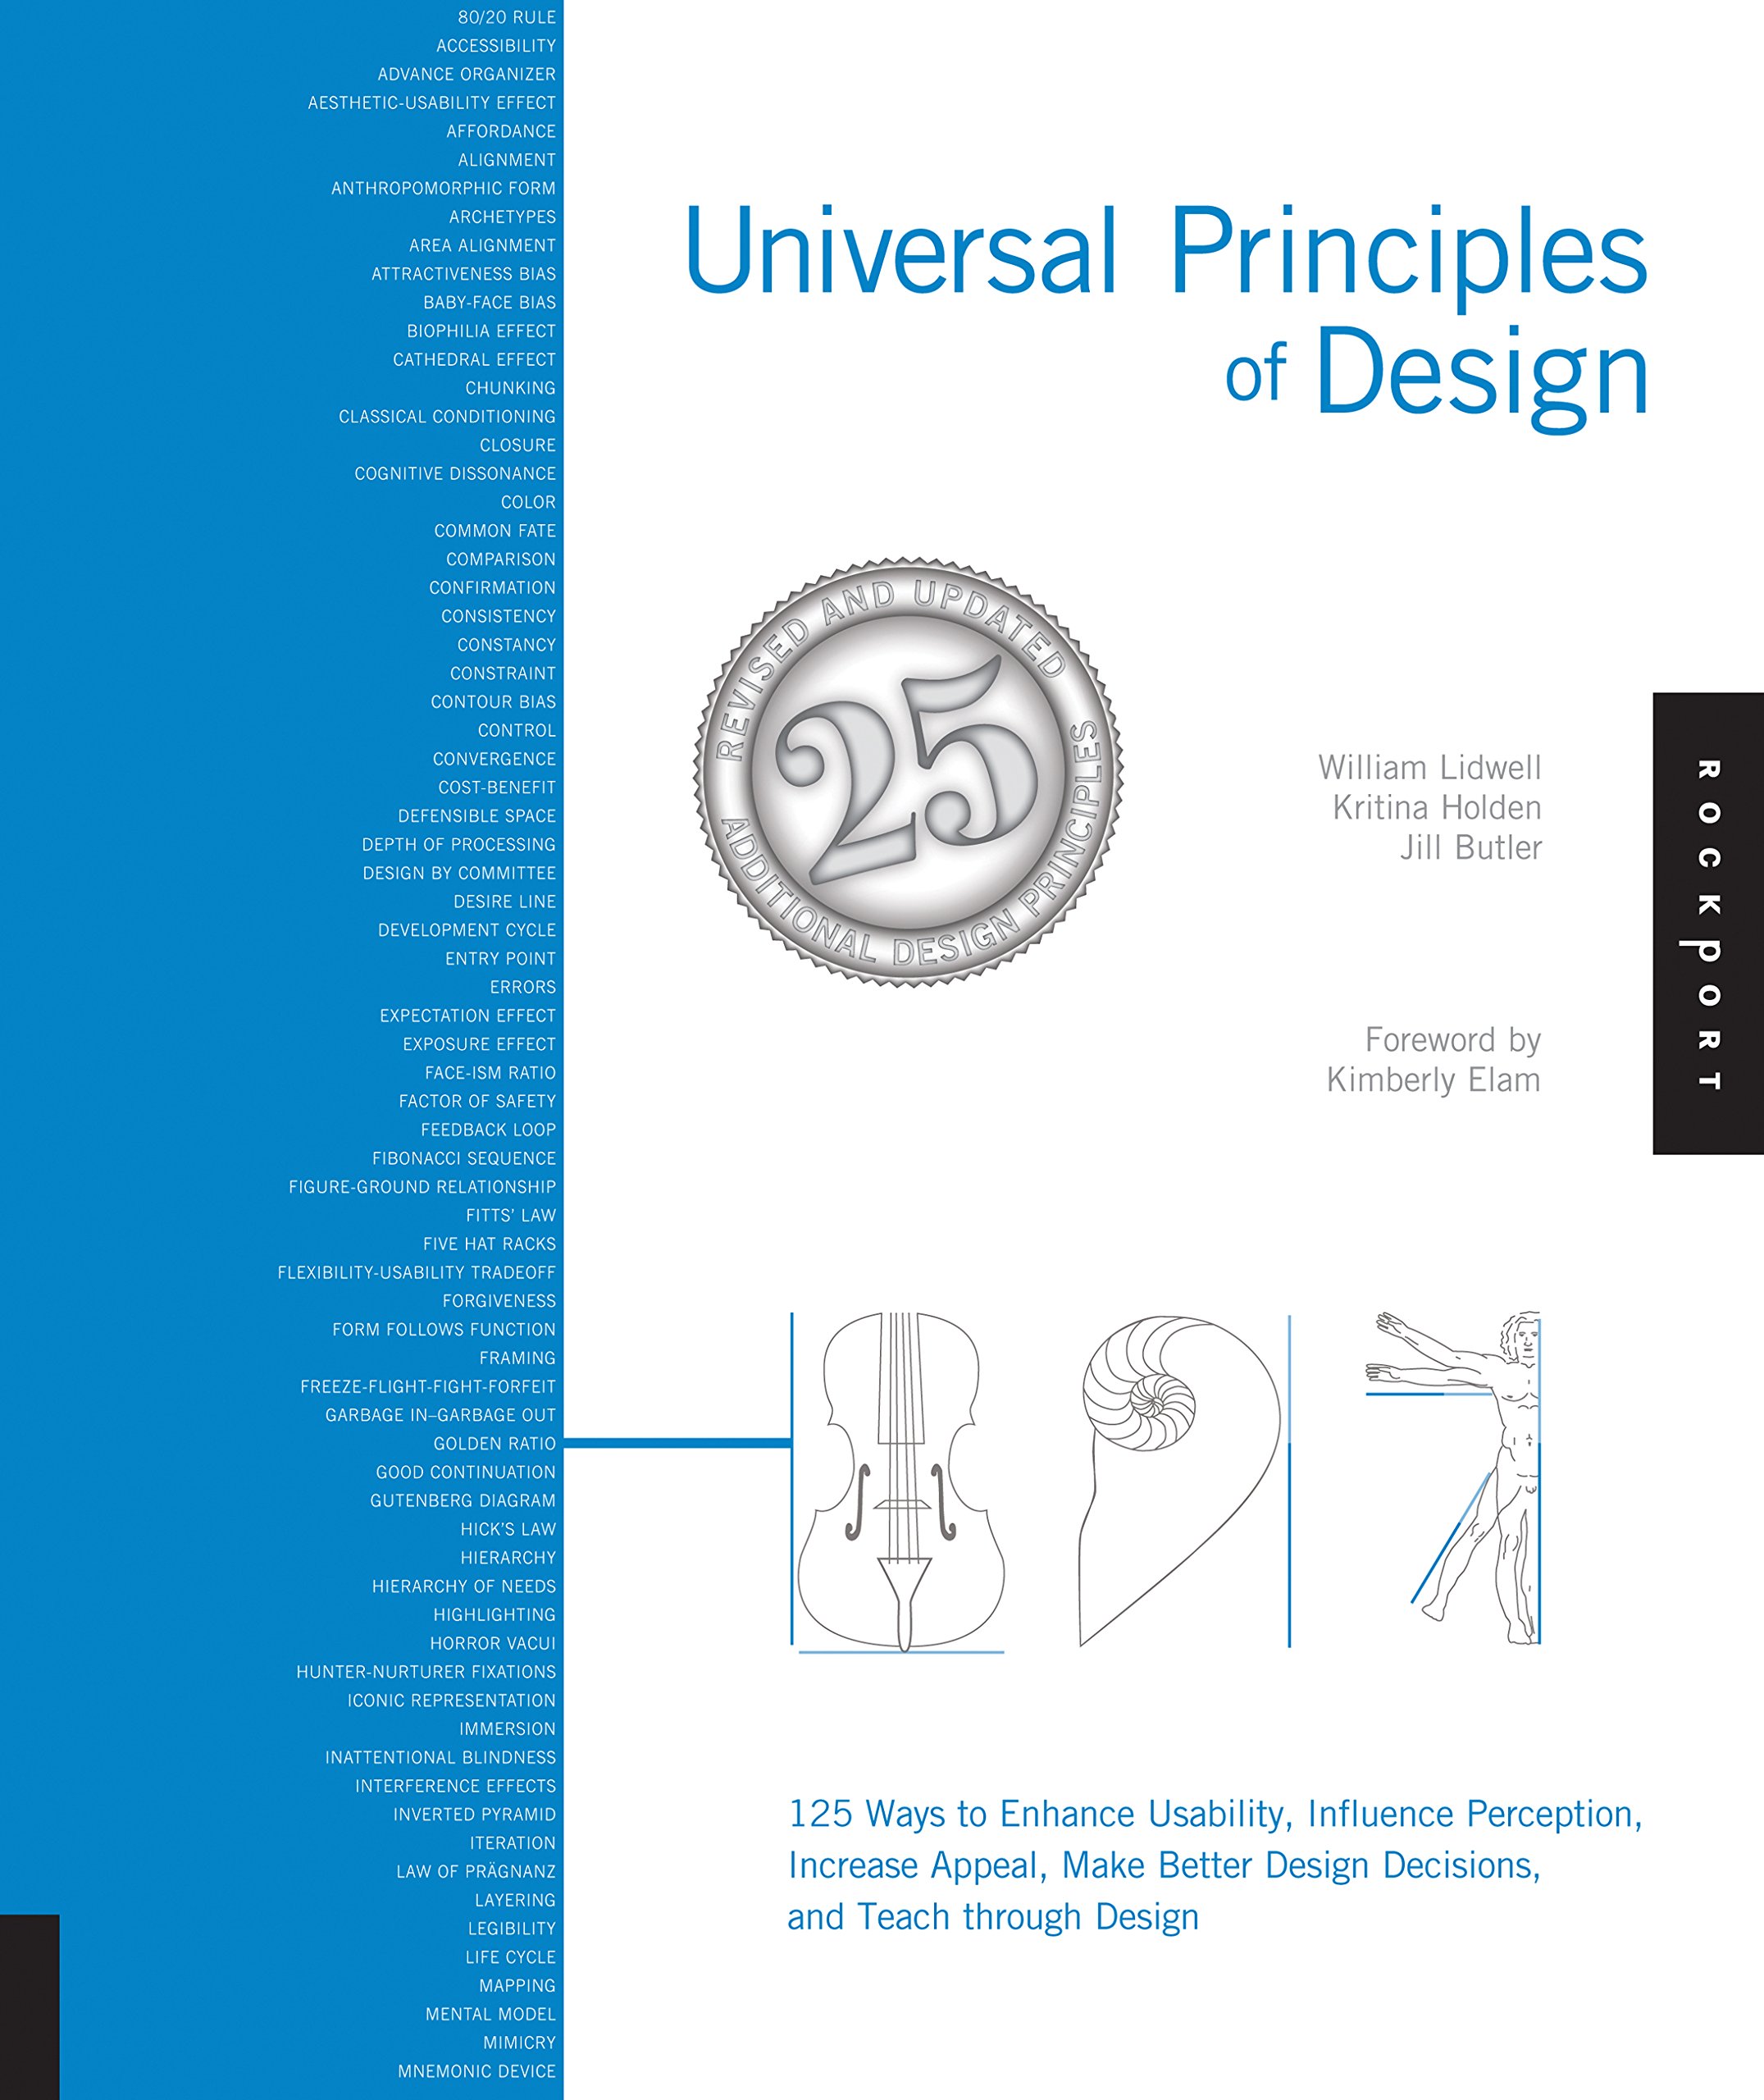 Universal Principles of Design Book by William Lidwell